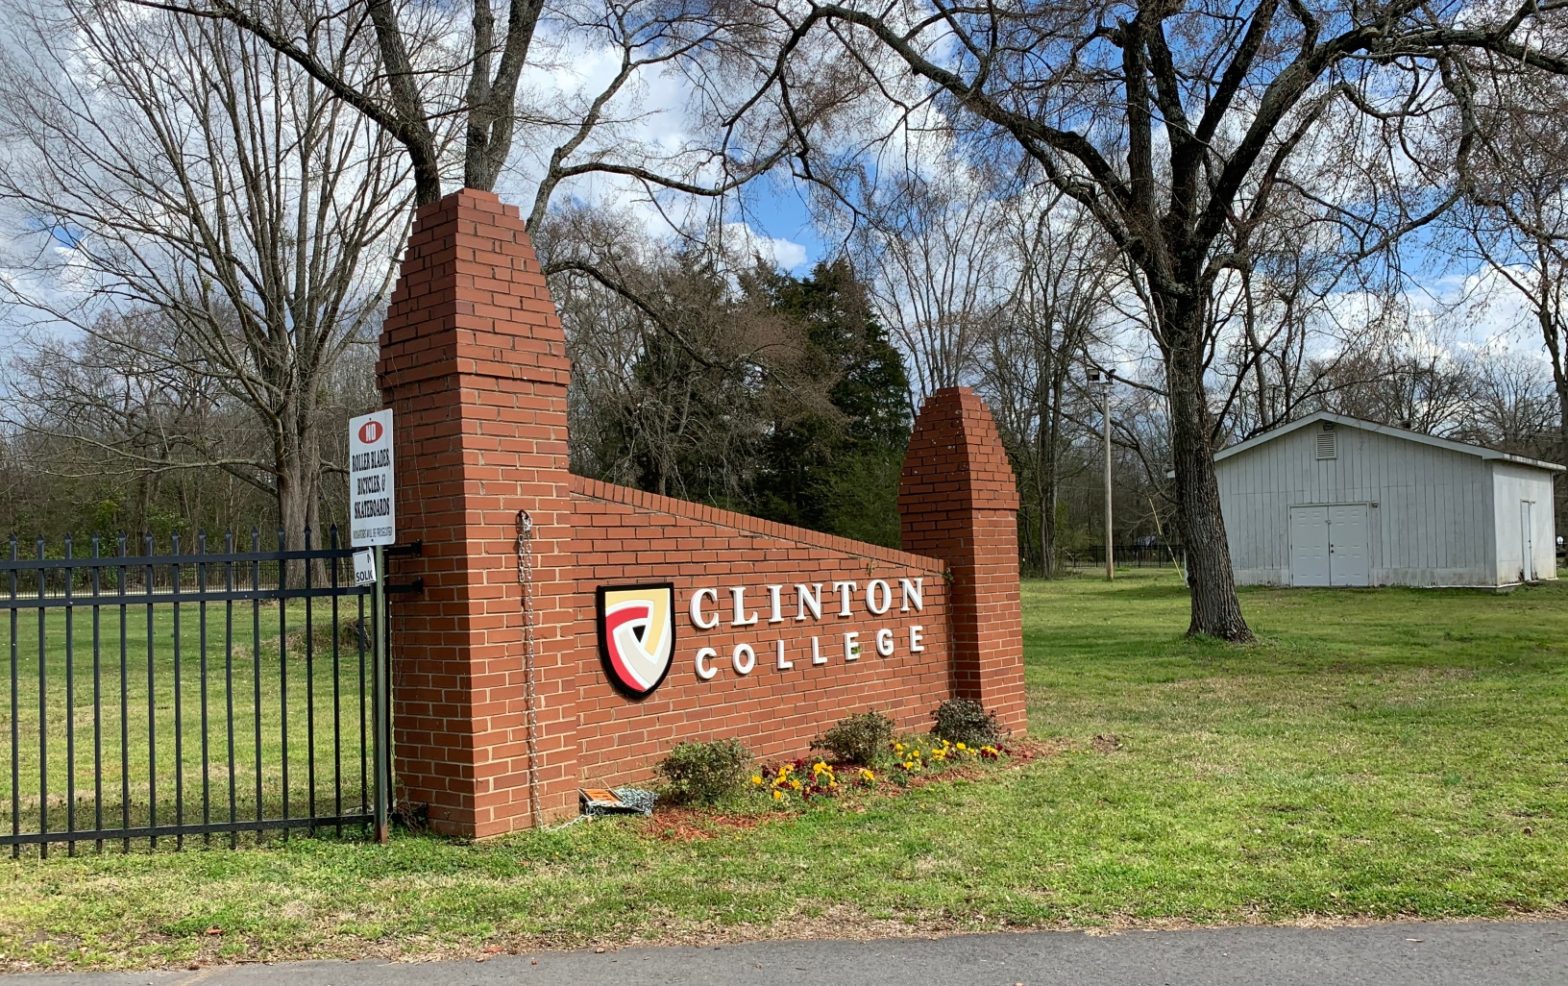 HBCU Clinton College To Offer Full-Time Students Free Tuition For 2021-2022 School Year